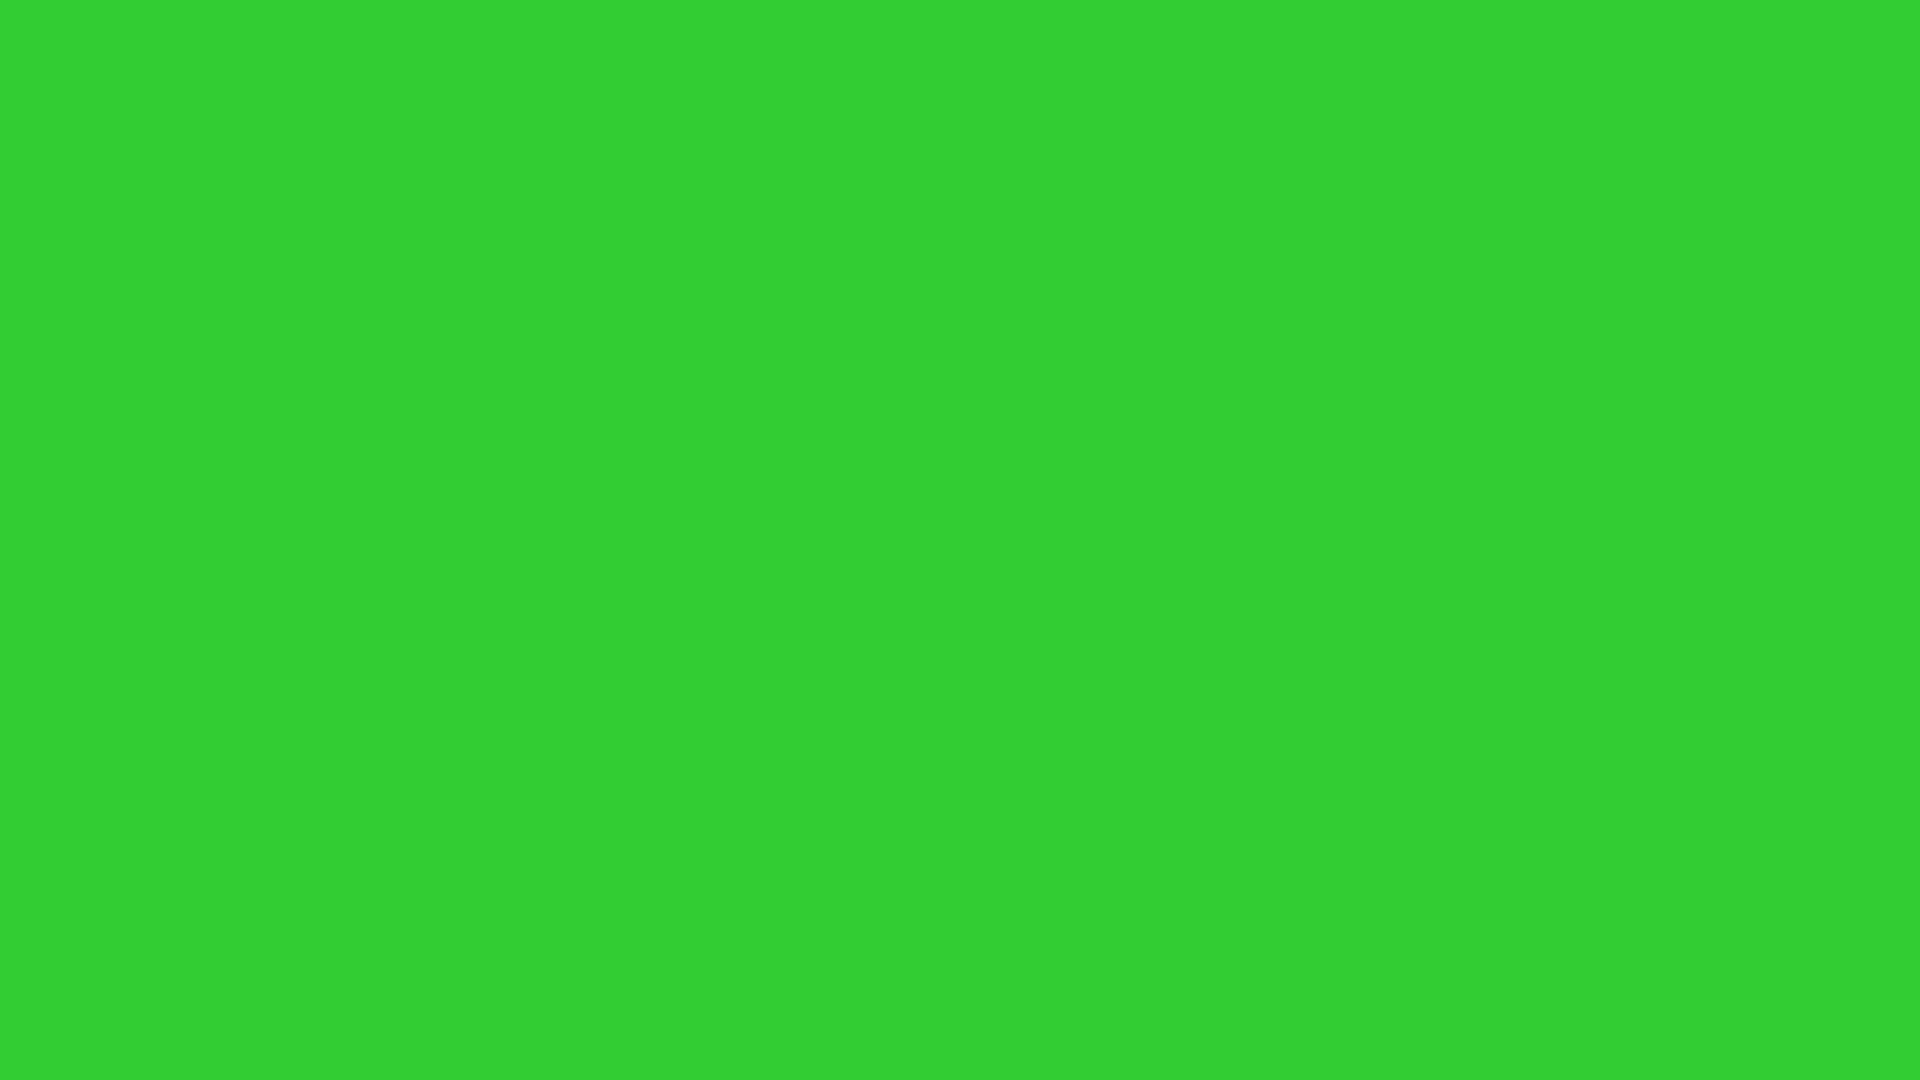 Lime Green Solid Color Backgrounds Images Pictures   Becuo